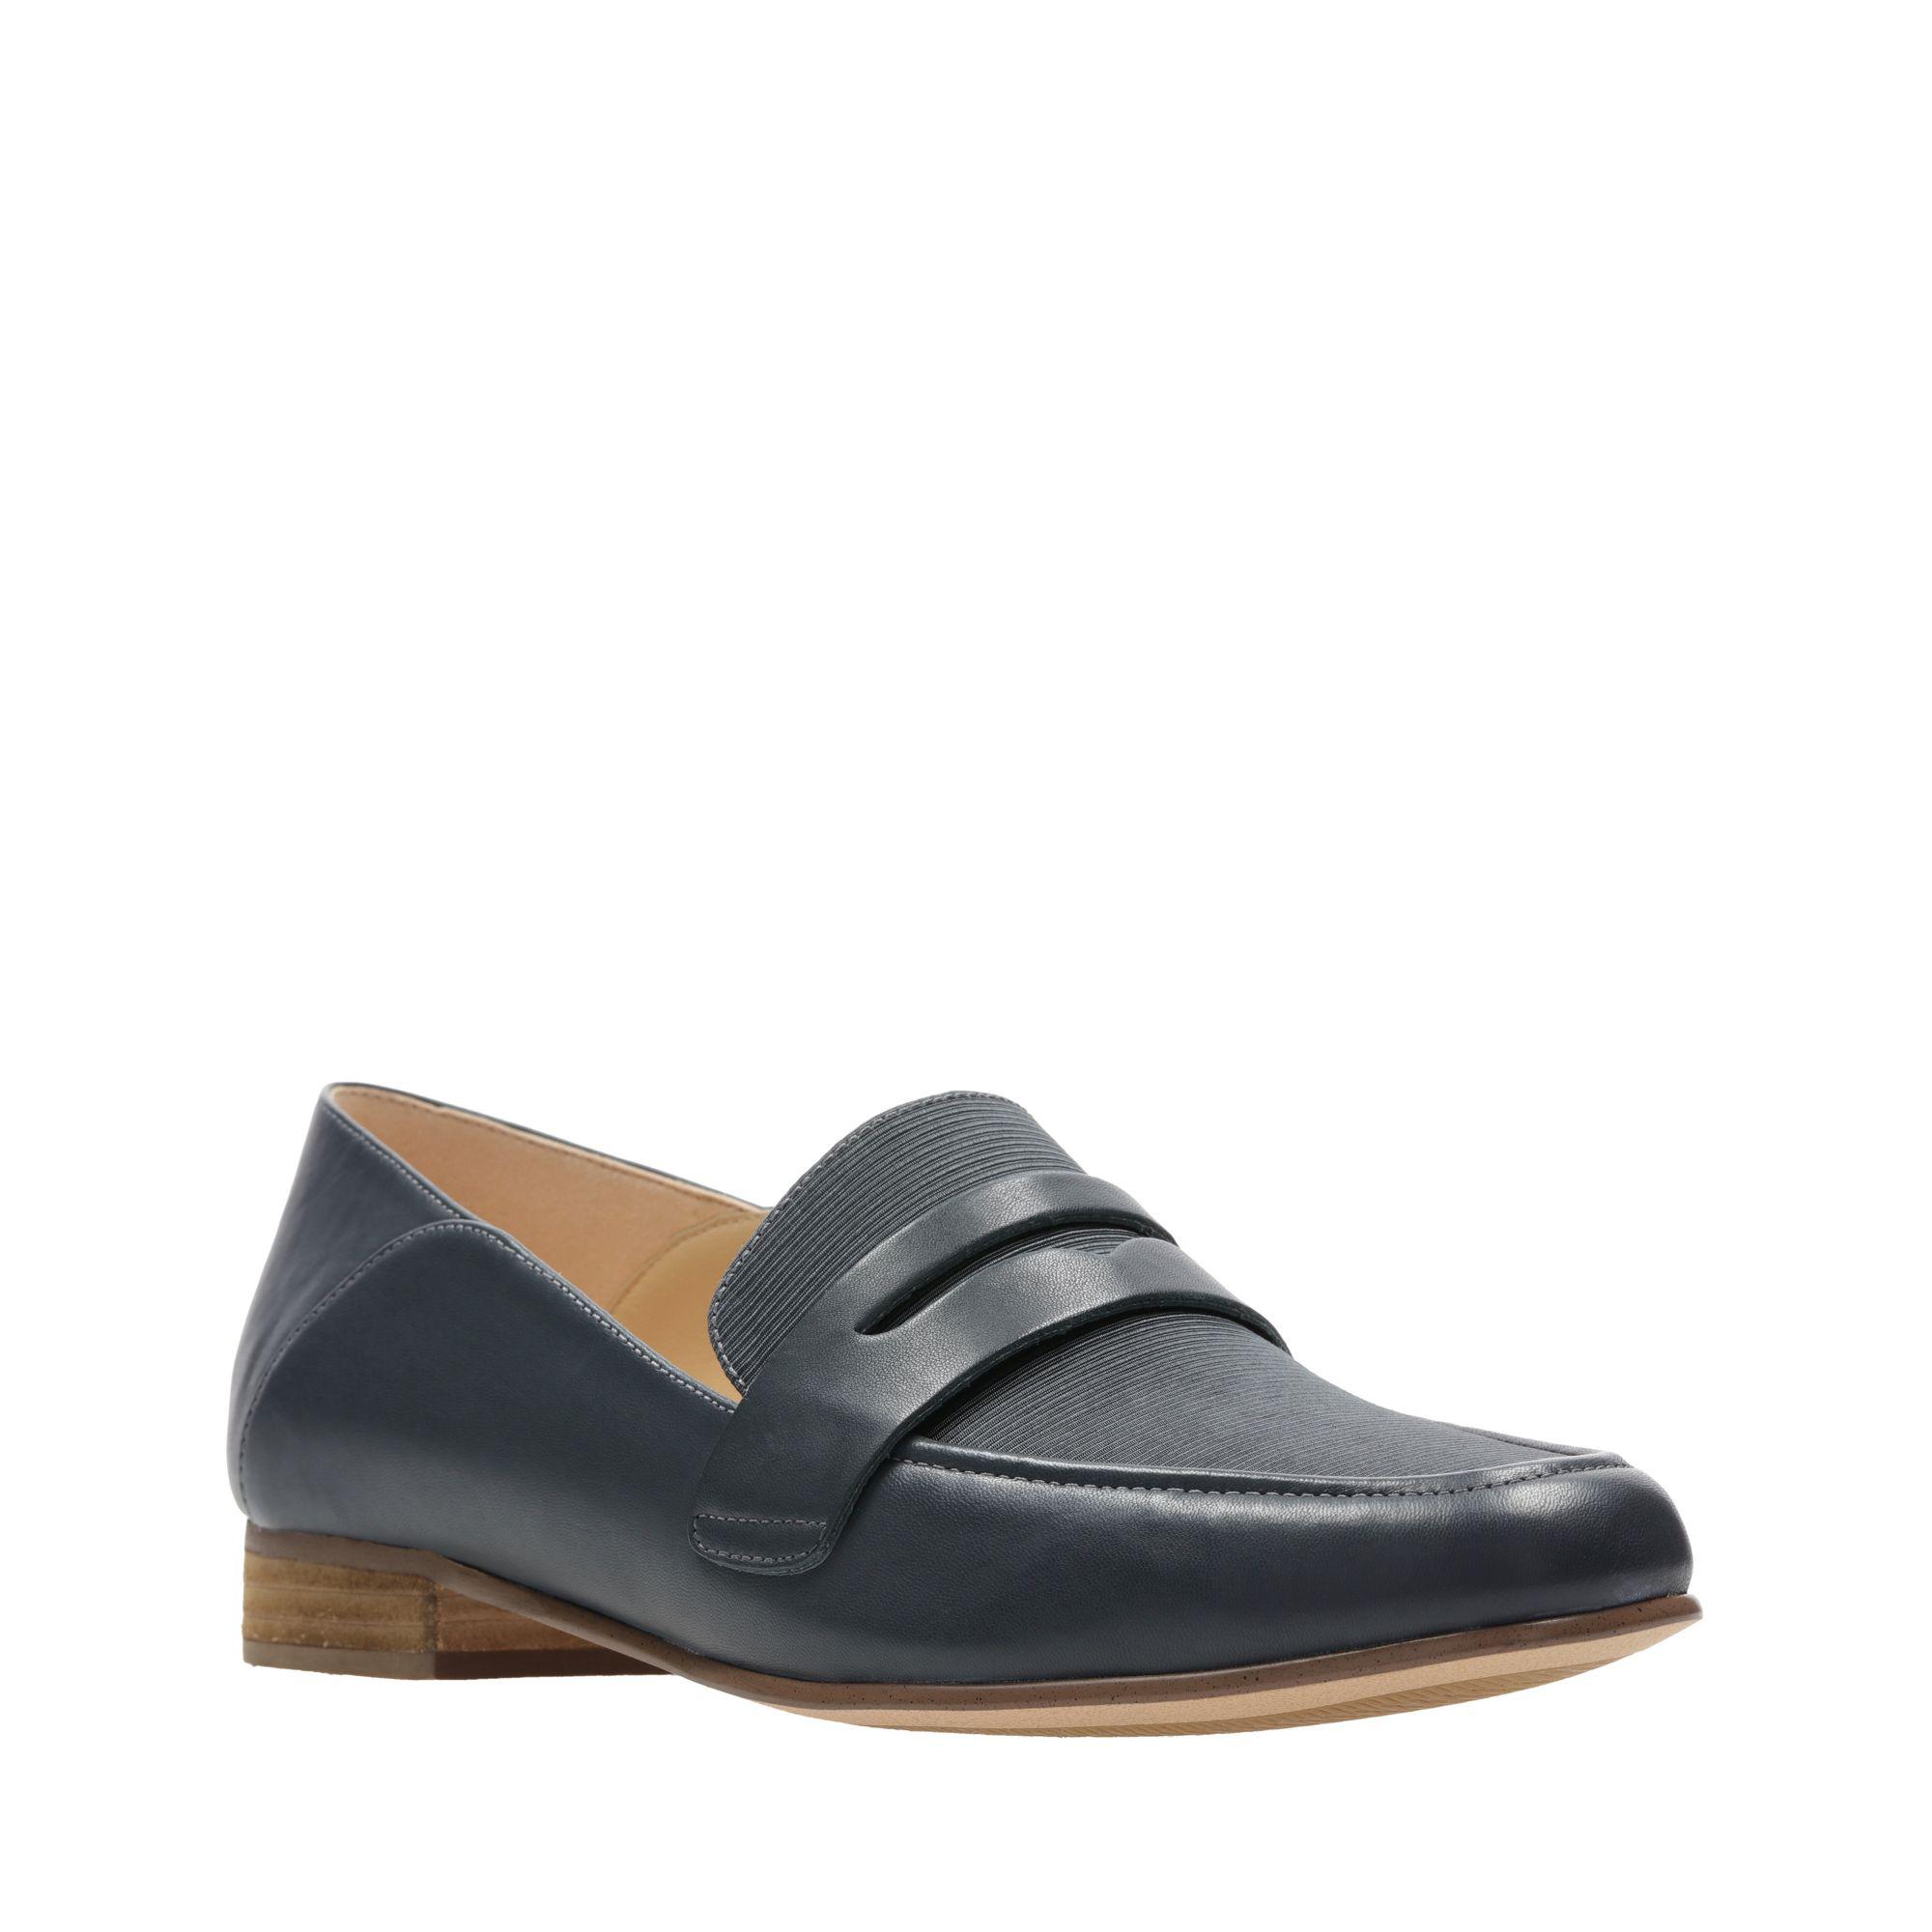 Clarks Leather Pure Iris in Gray - Lyst